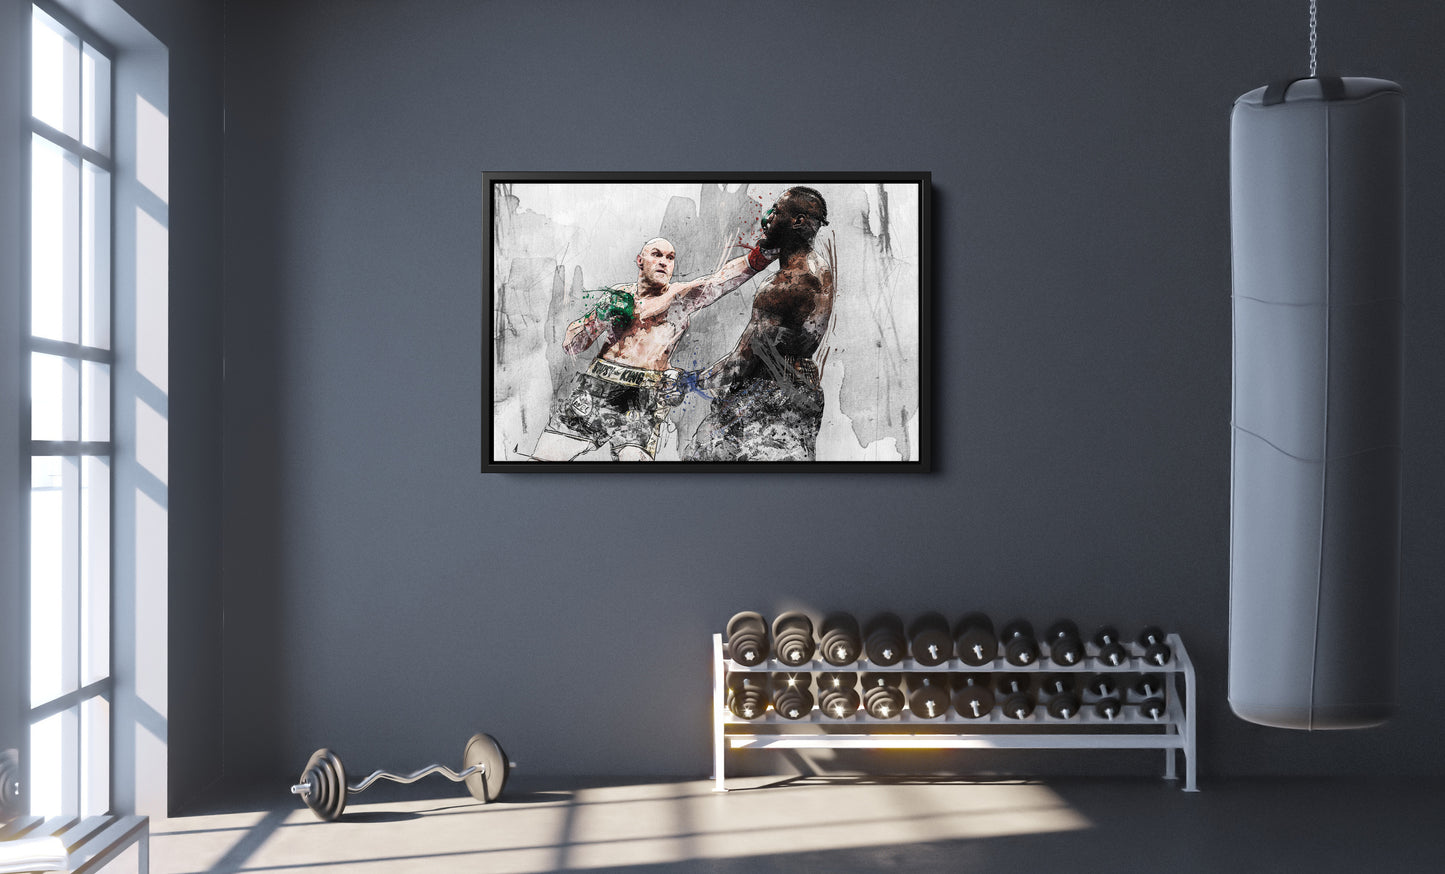 Tyson Fury vs Deontay Wilder Poster Boxing Painting Canvas Poster Wall Art Print Home Decor Framed Art